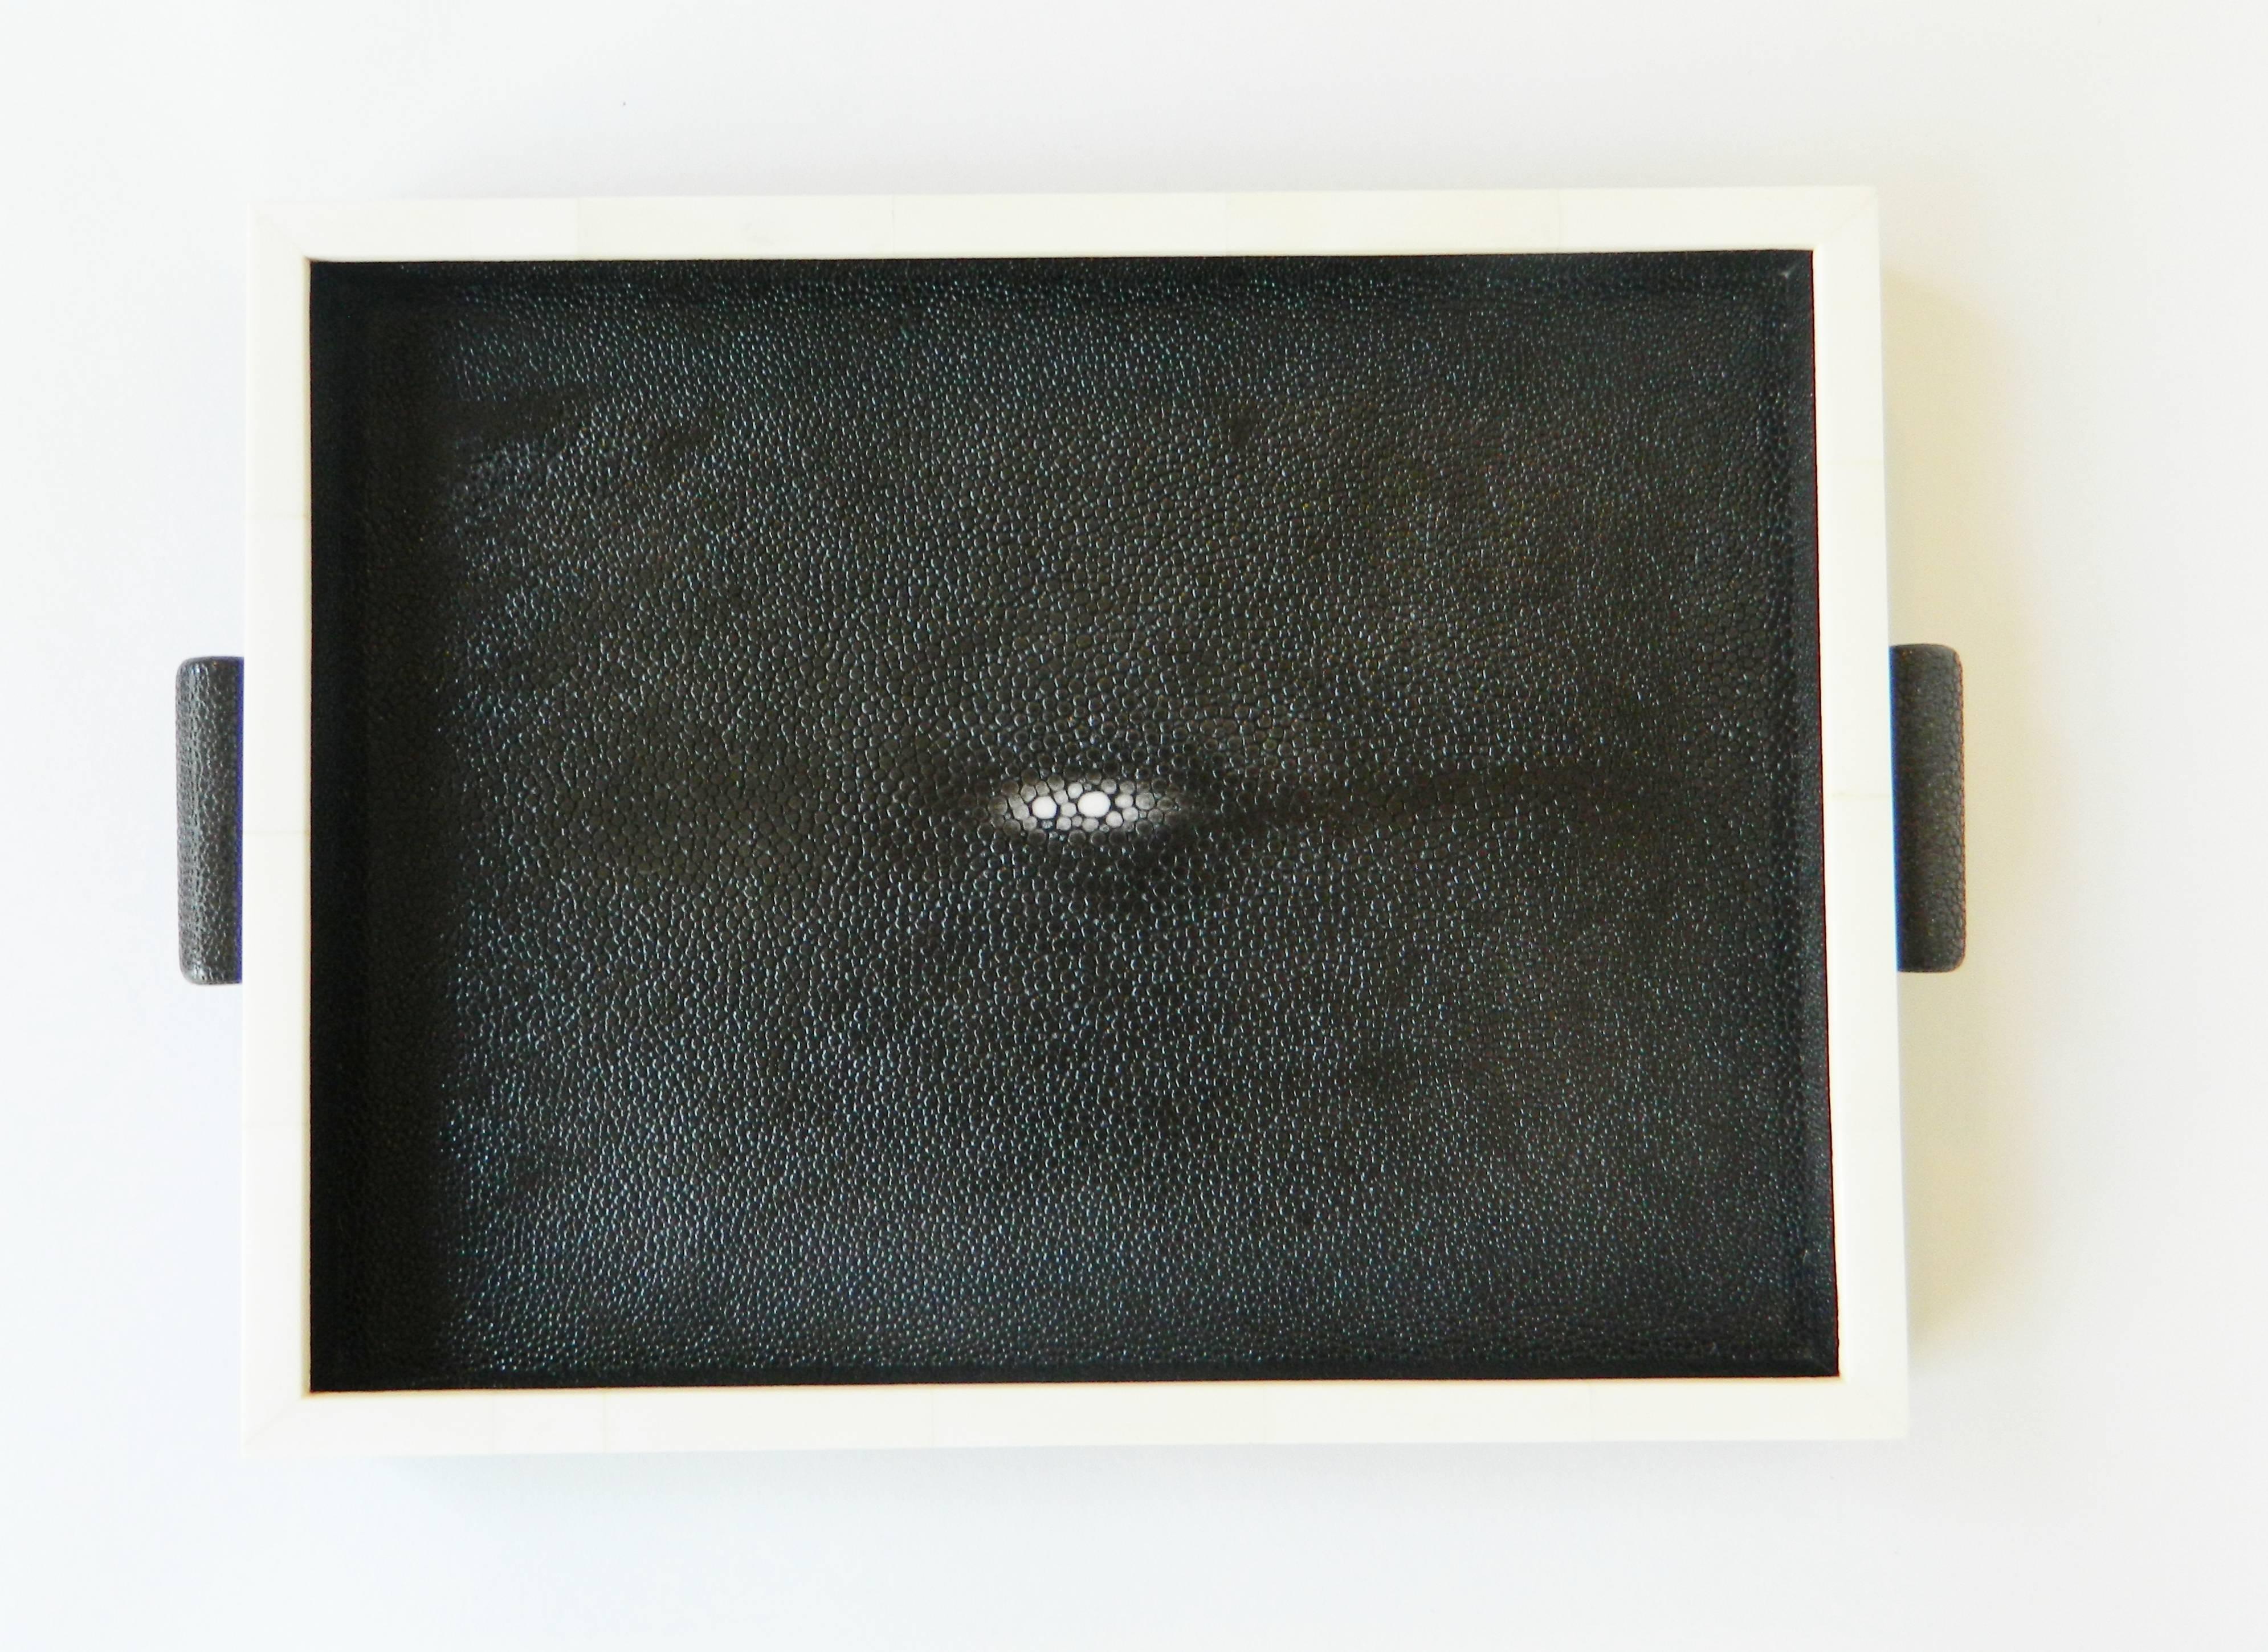 Top quality natural shagreen tray with bone 
Size: 12.5'' W X 9.5'' L and 3/4'' deep
